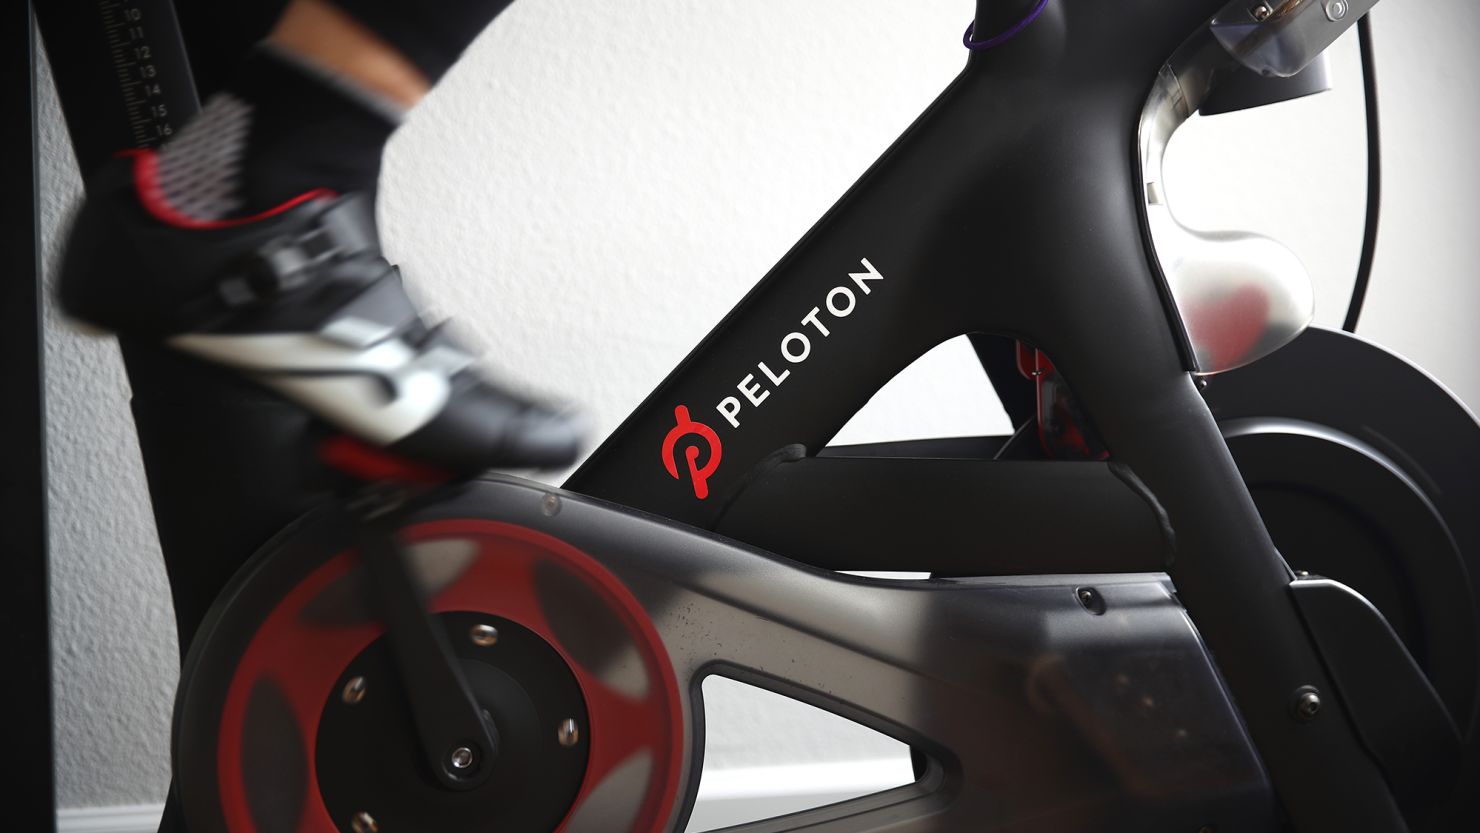 Peloton completely overhauled its digital app last year, hoping the new look and pricing tiers will attract more customers.